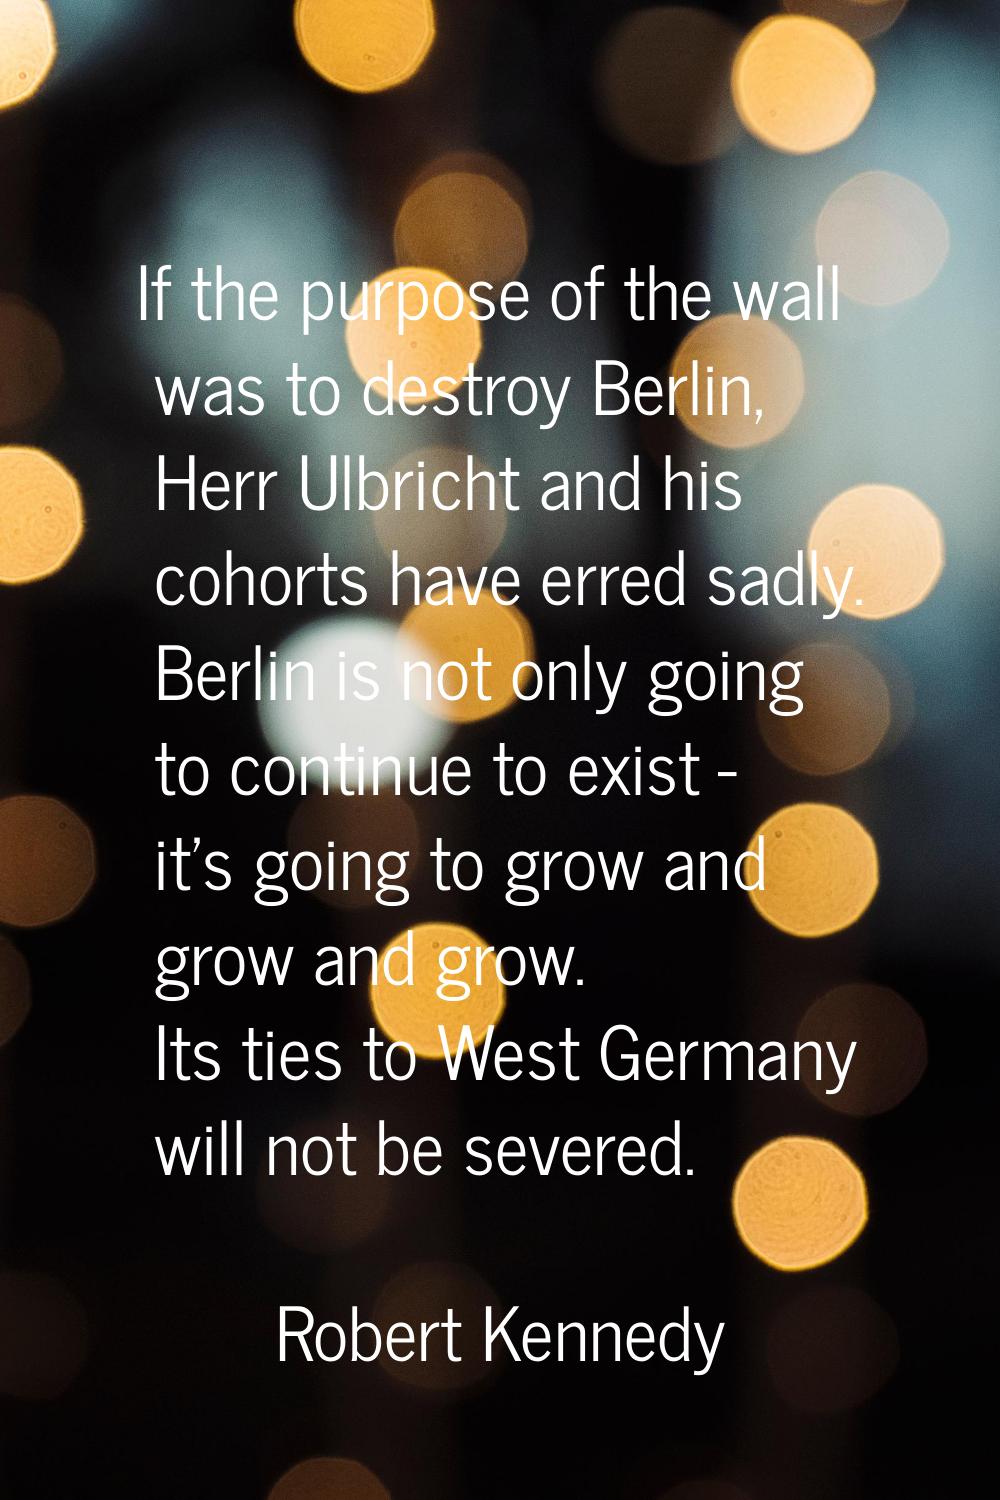 If the purpose of the wall was to destroy Berlin, Herr Ulbricht and his cohorts have erred sadly. B